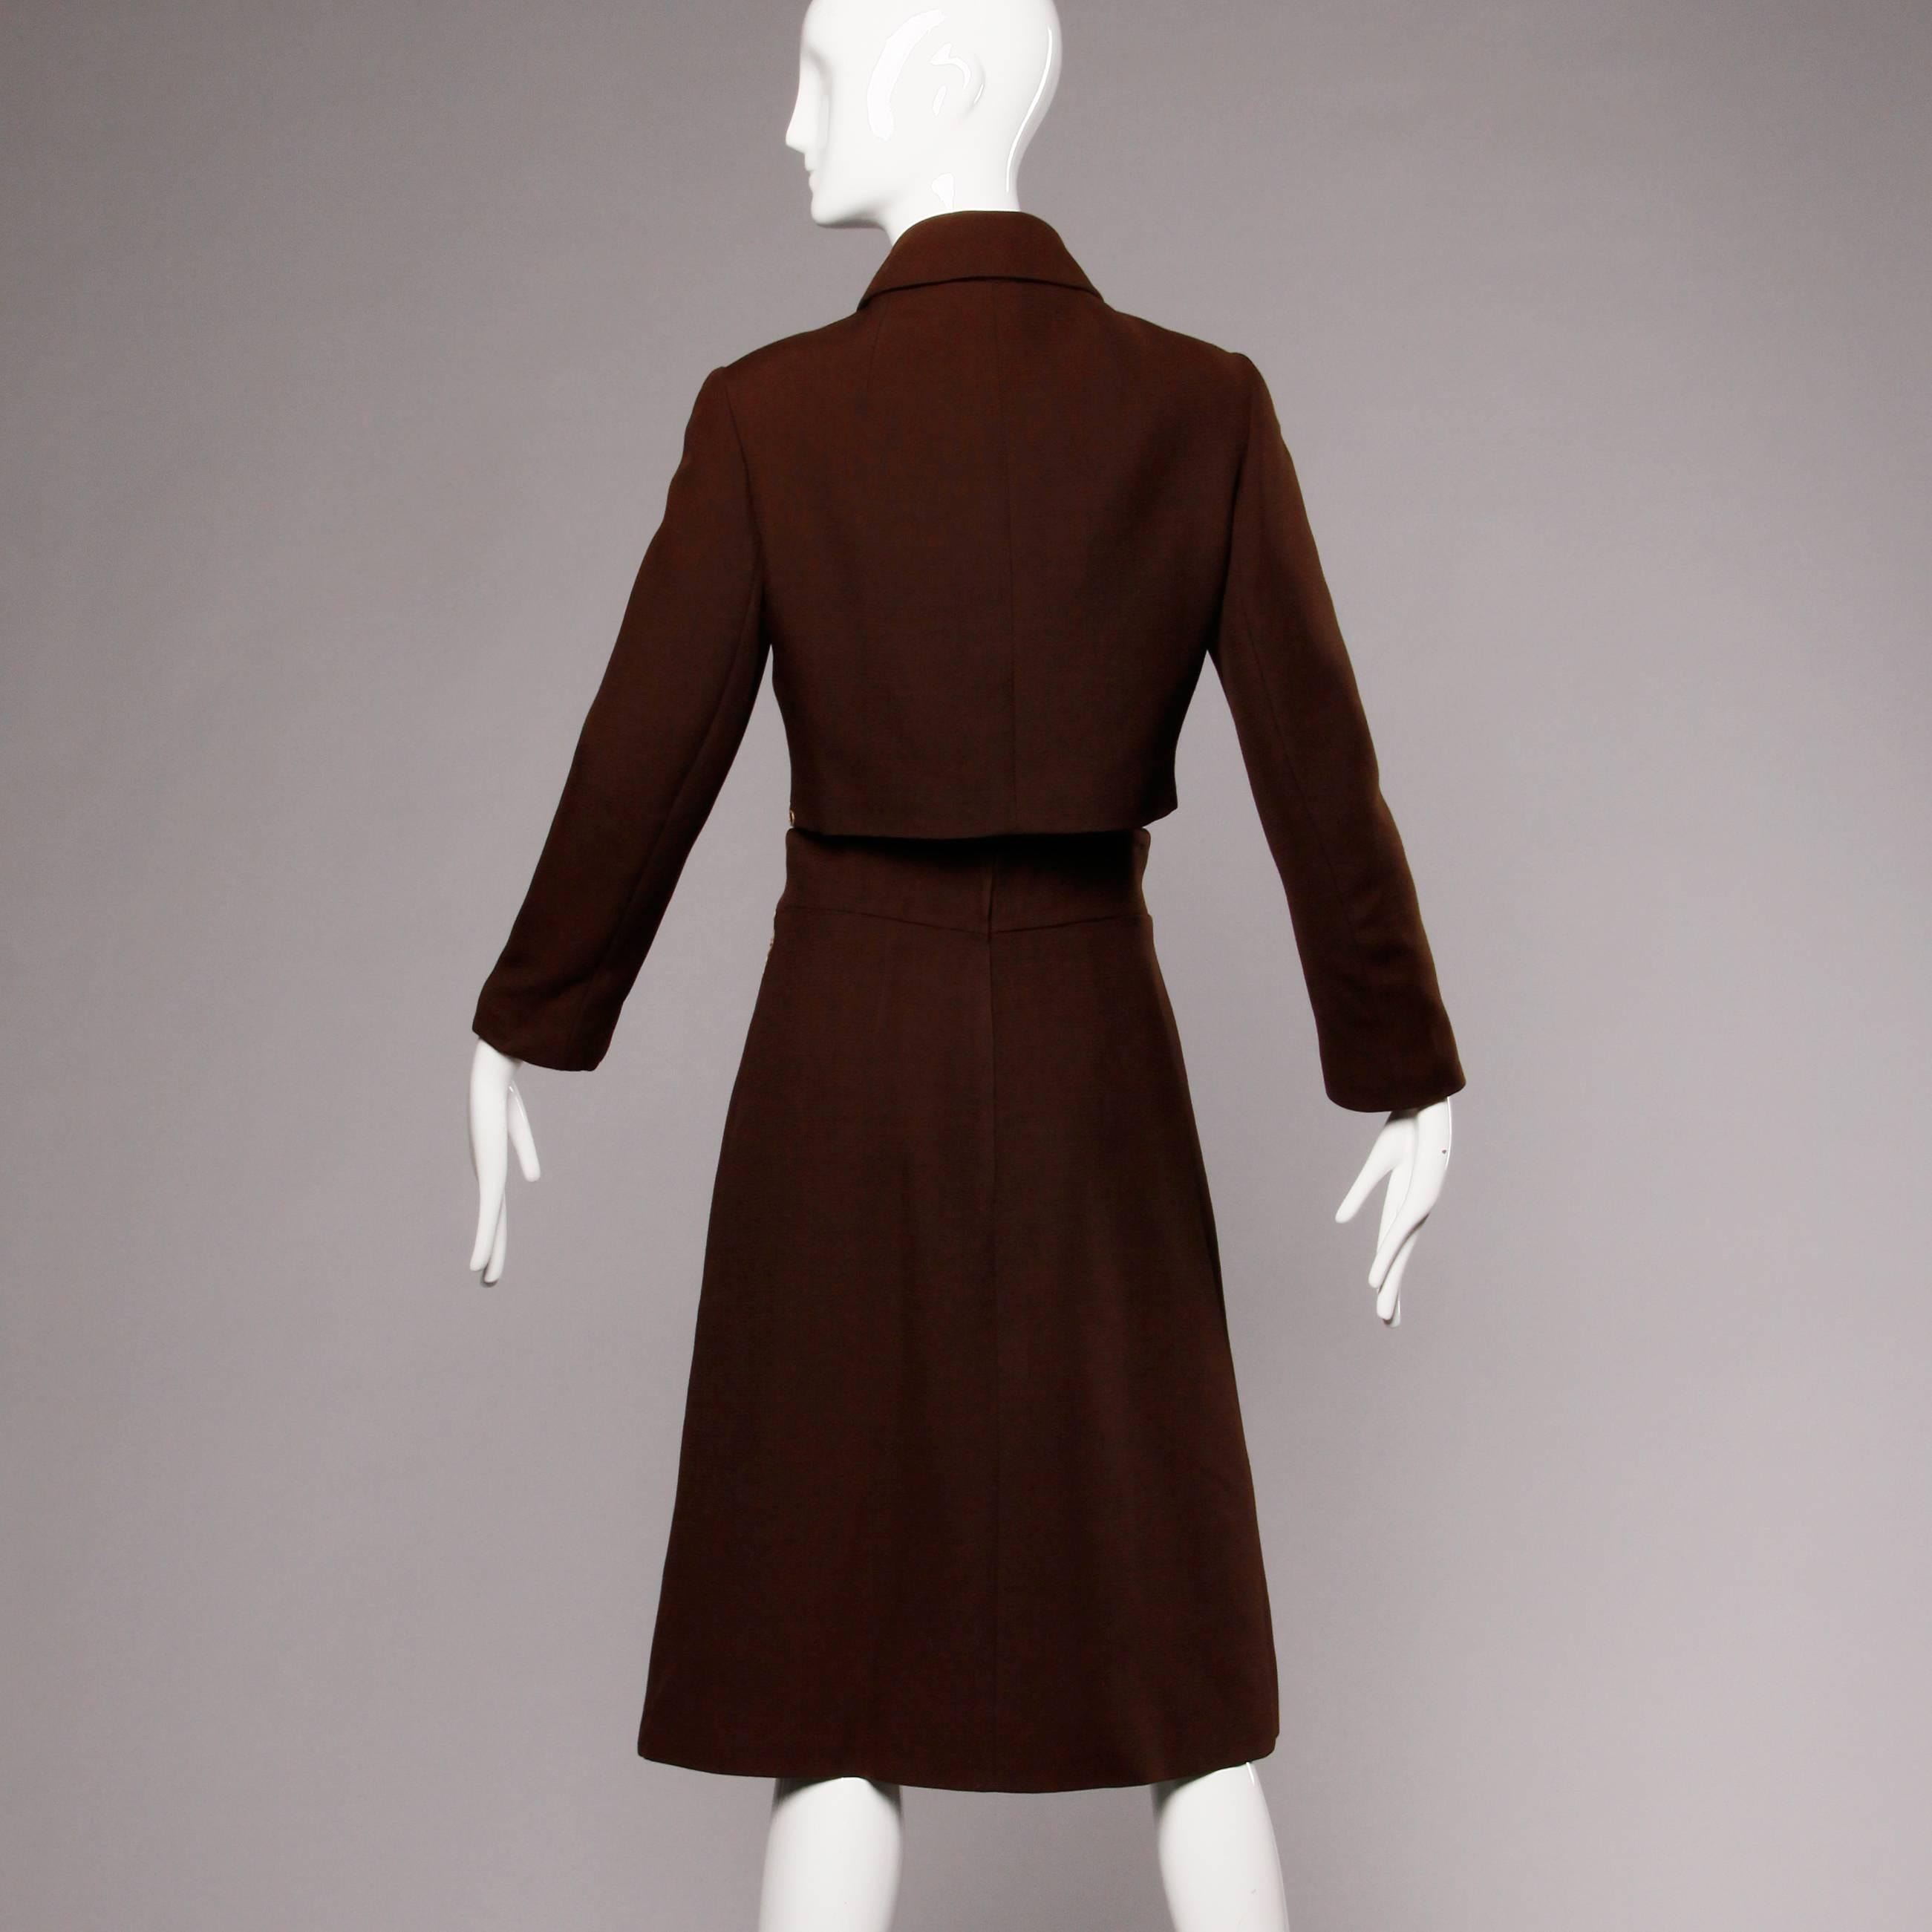 1960s Vintage English-Made Wool Jacket + Skirt Ensemble with Embroidery 2